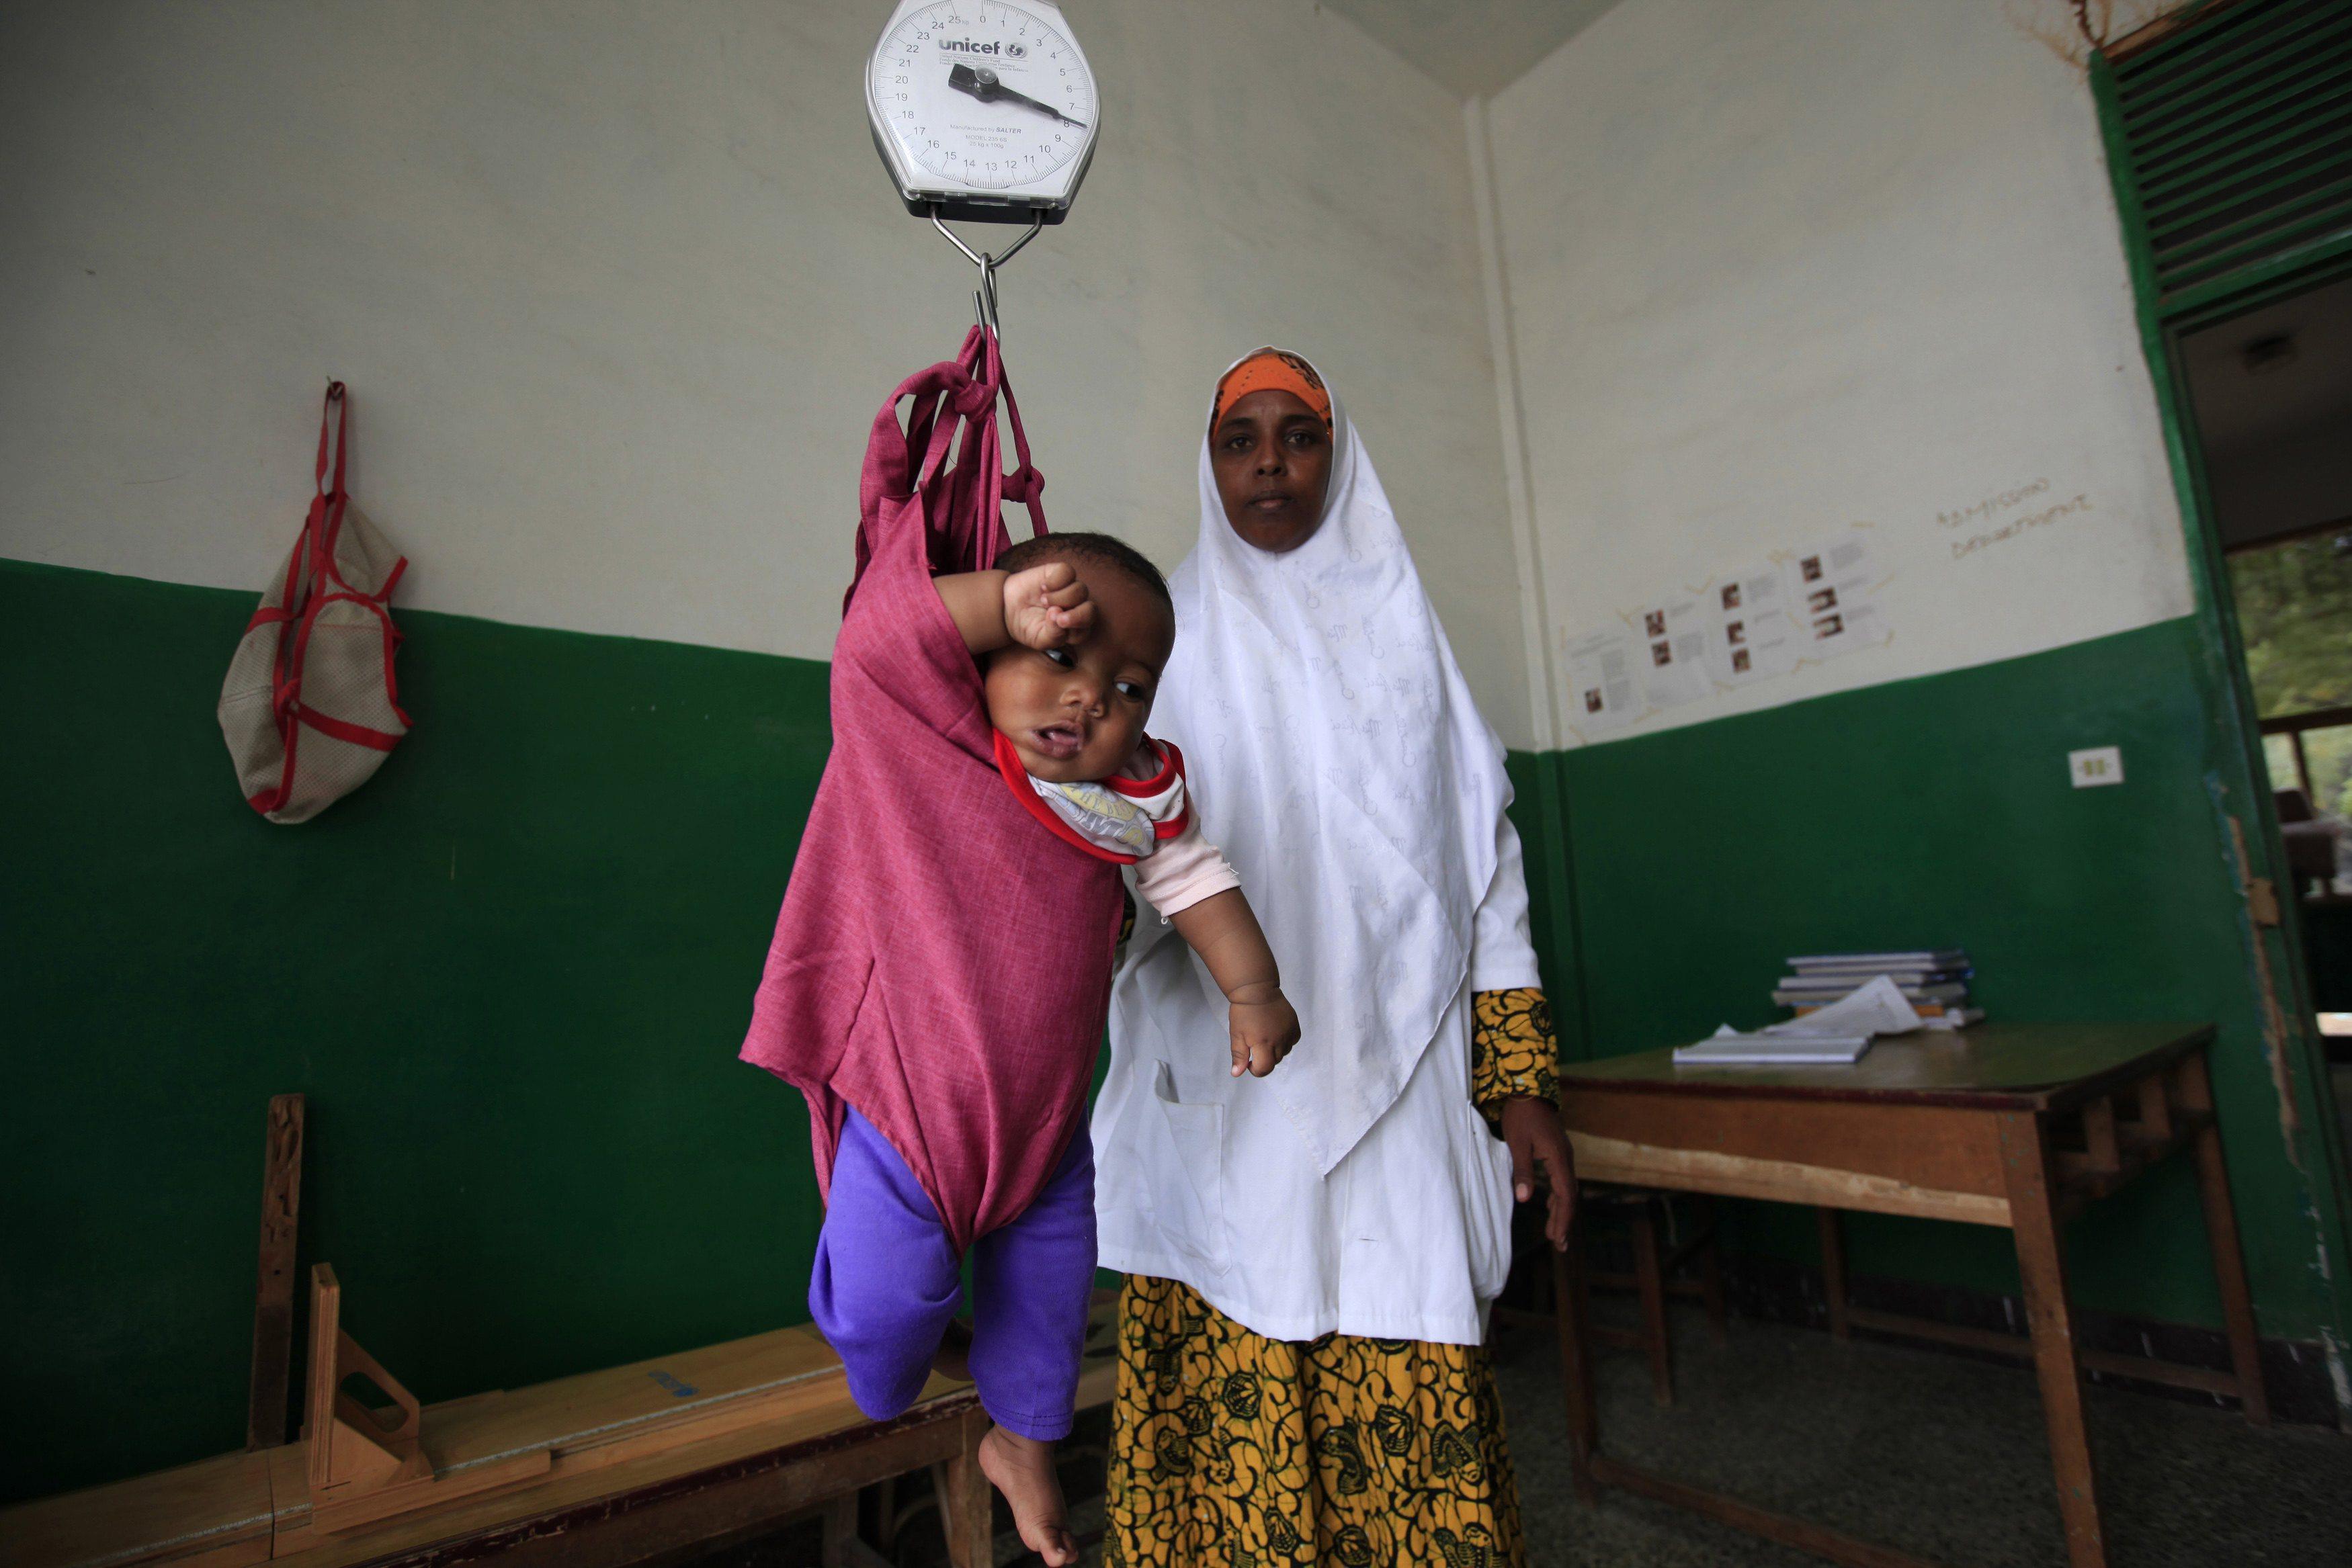 An internally displaced child is weighed at Banadir Hospital in Mogadishu September 28, 2013. Street